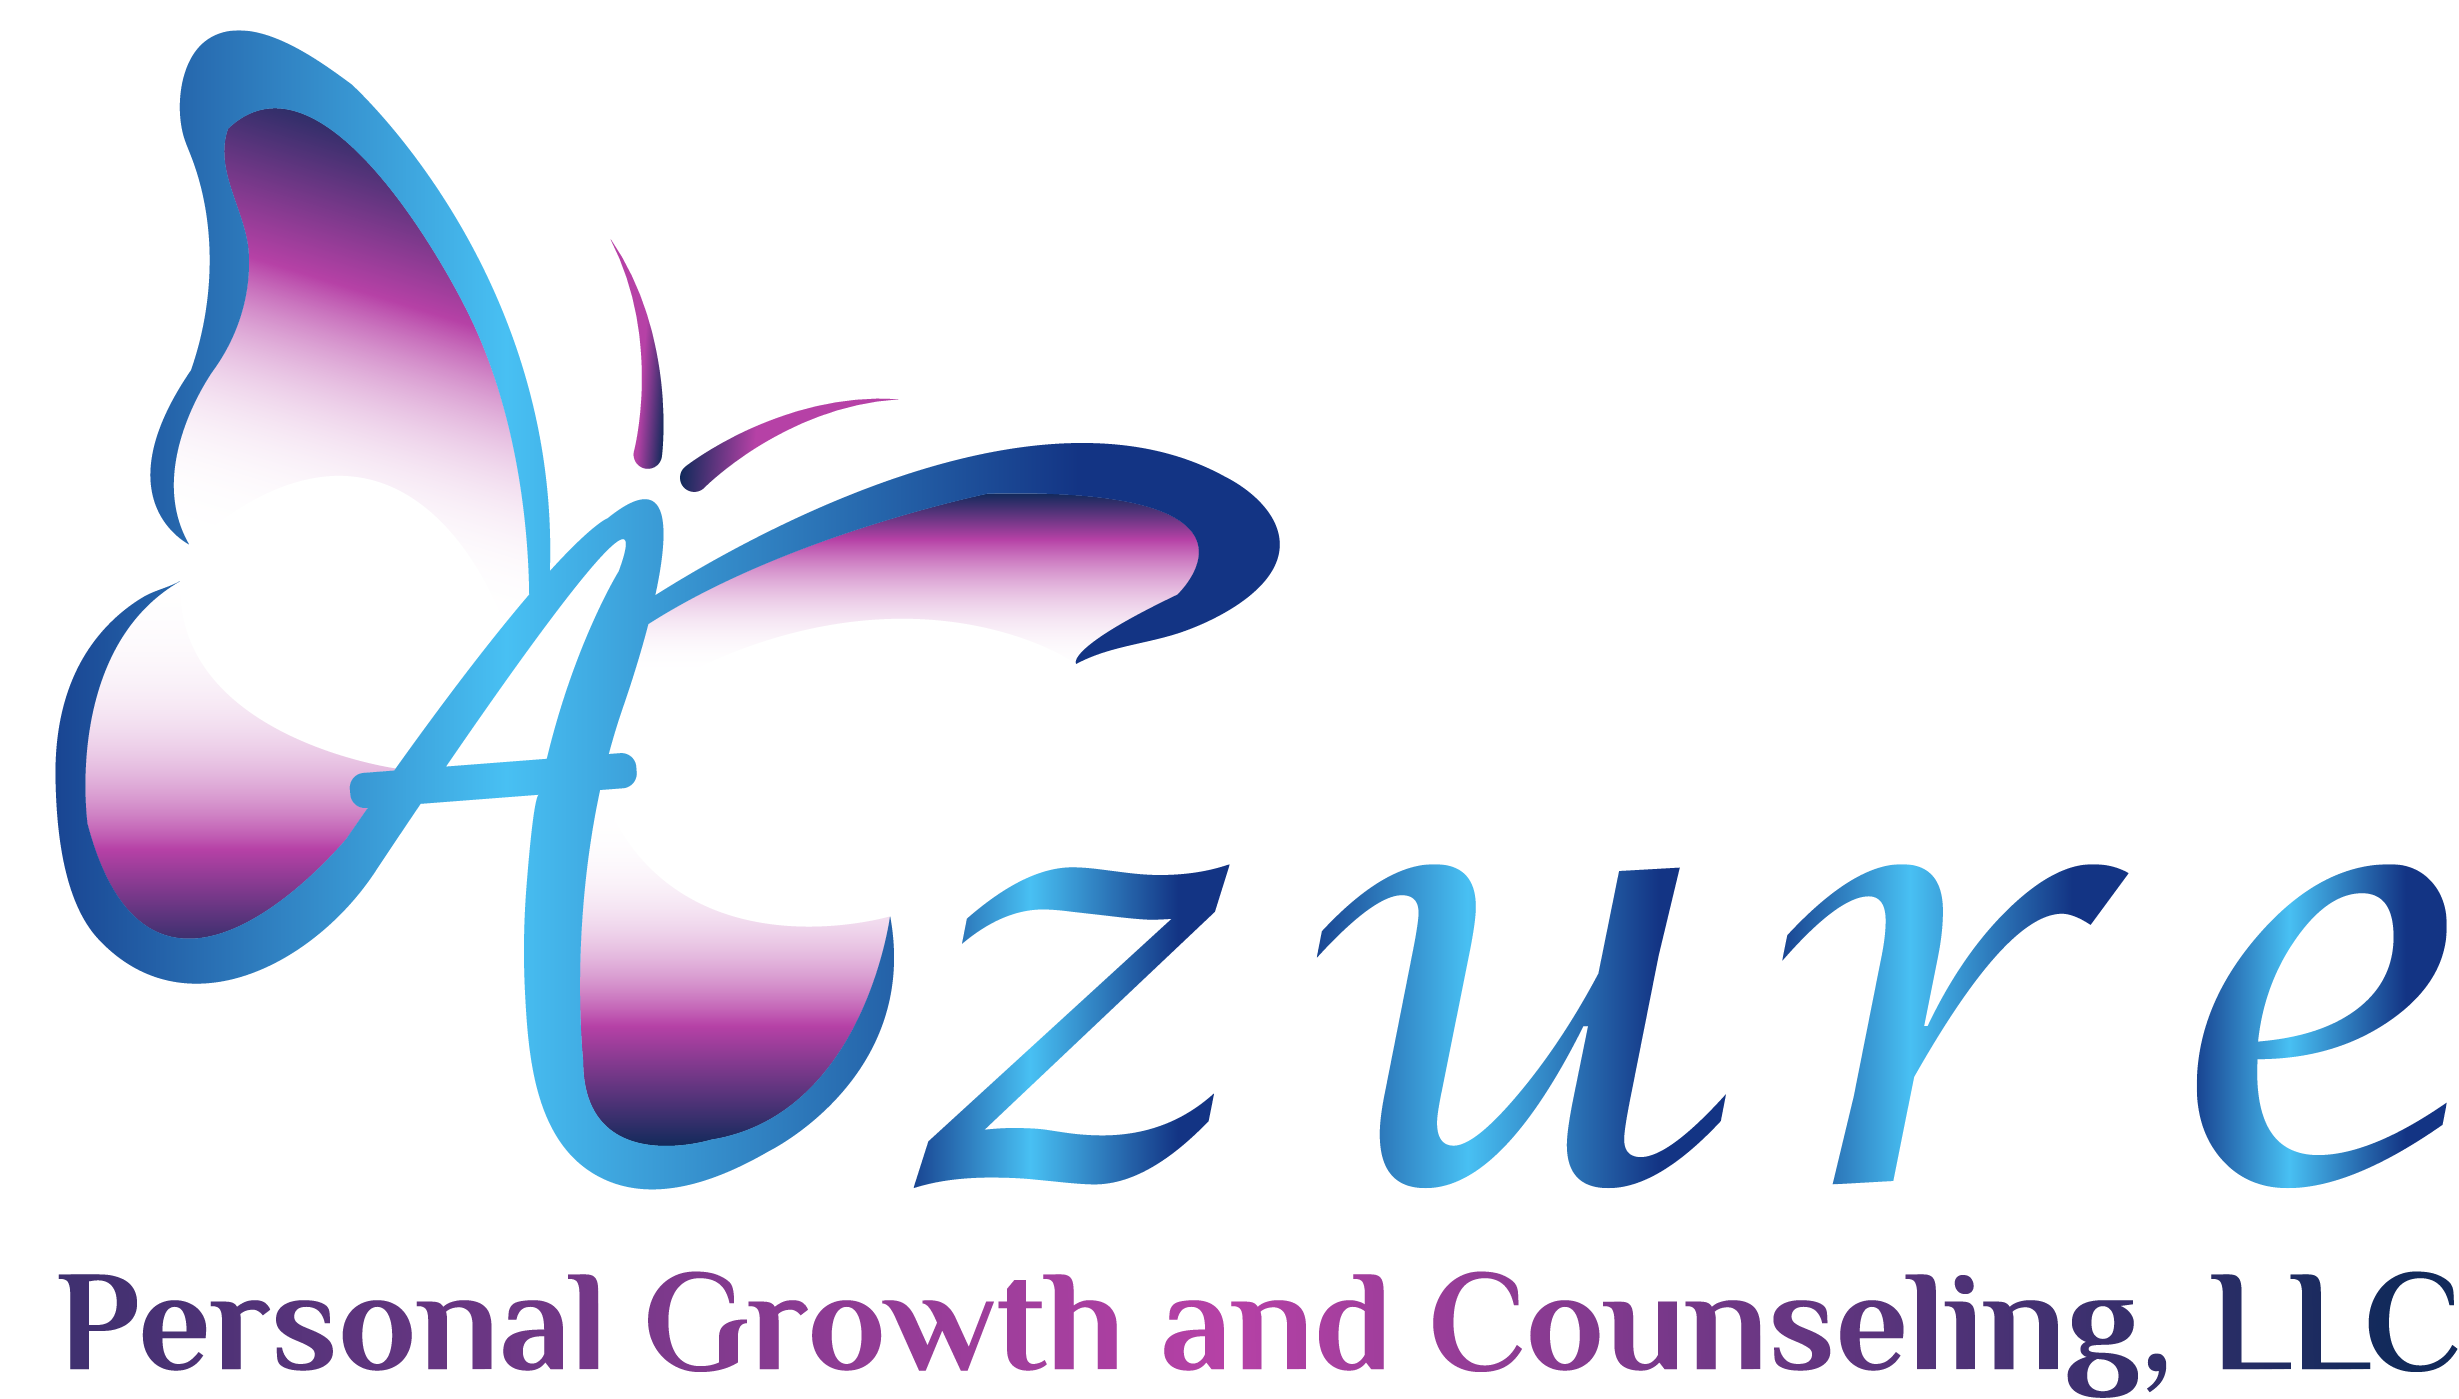 Azure Personal Growth & Counseling, LLC